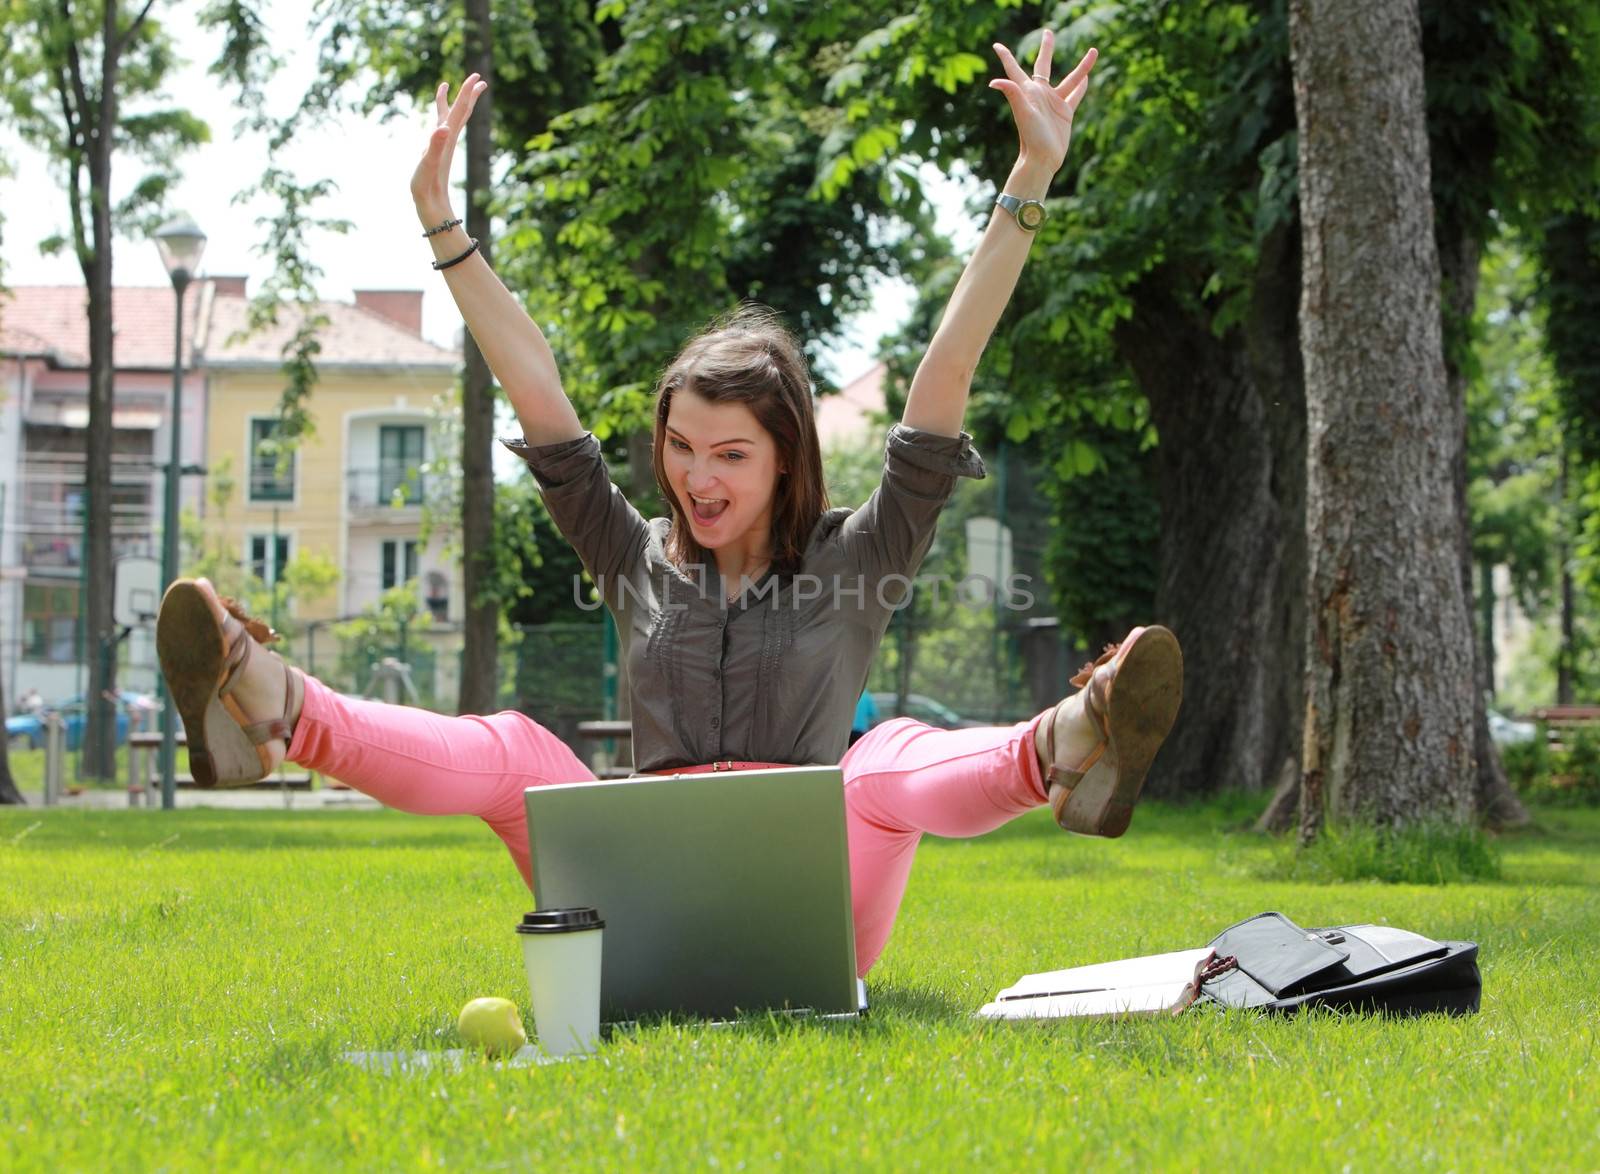 Excited happy woman with a laptop raising her hands and legs up in an urban park.